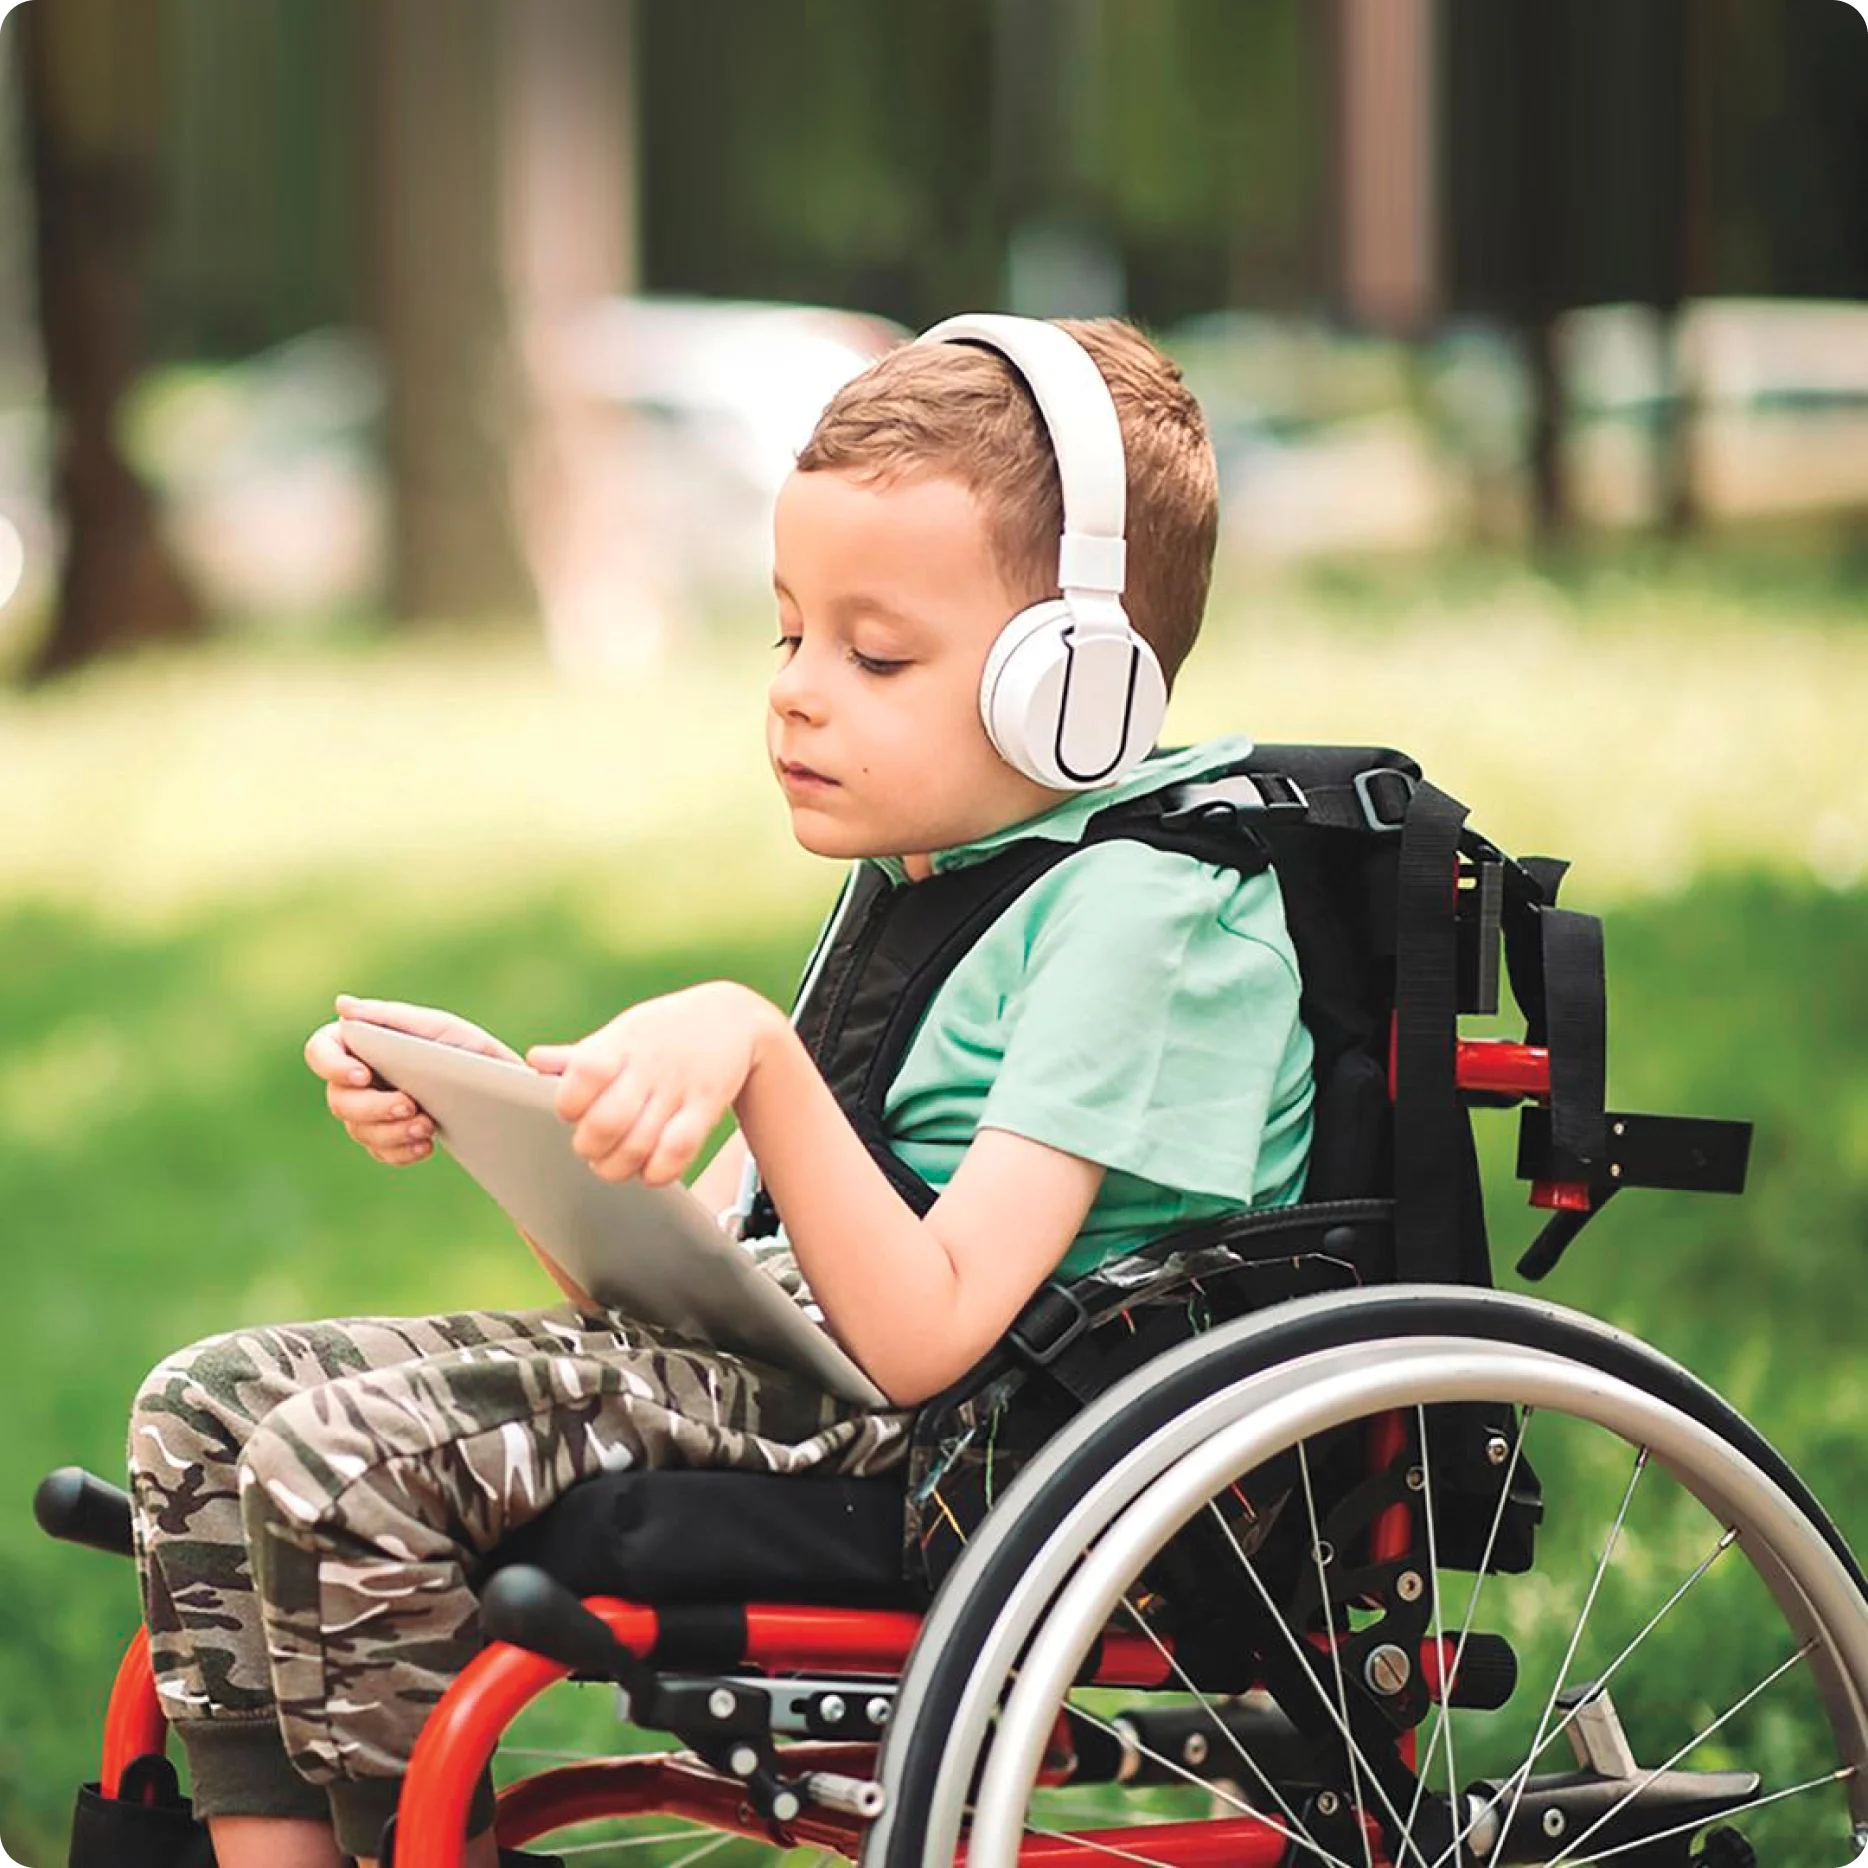 A child in a wheelchair reading a tablet while wearing headphones